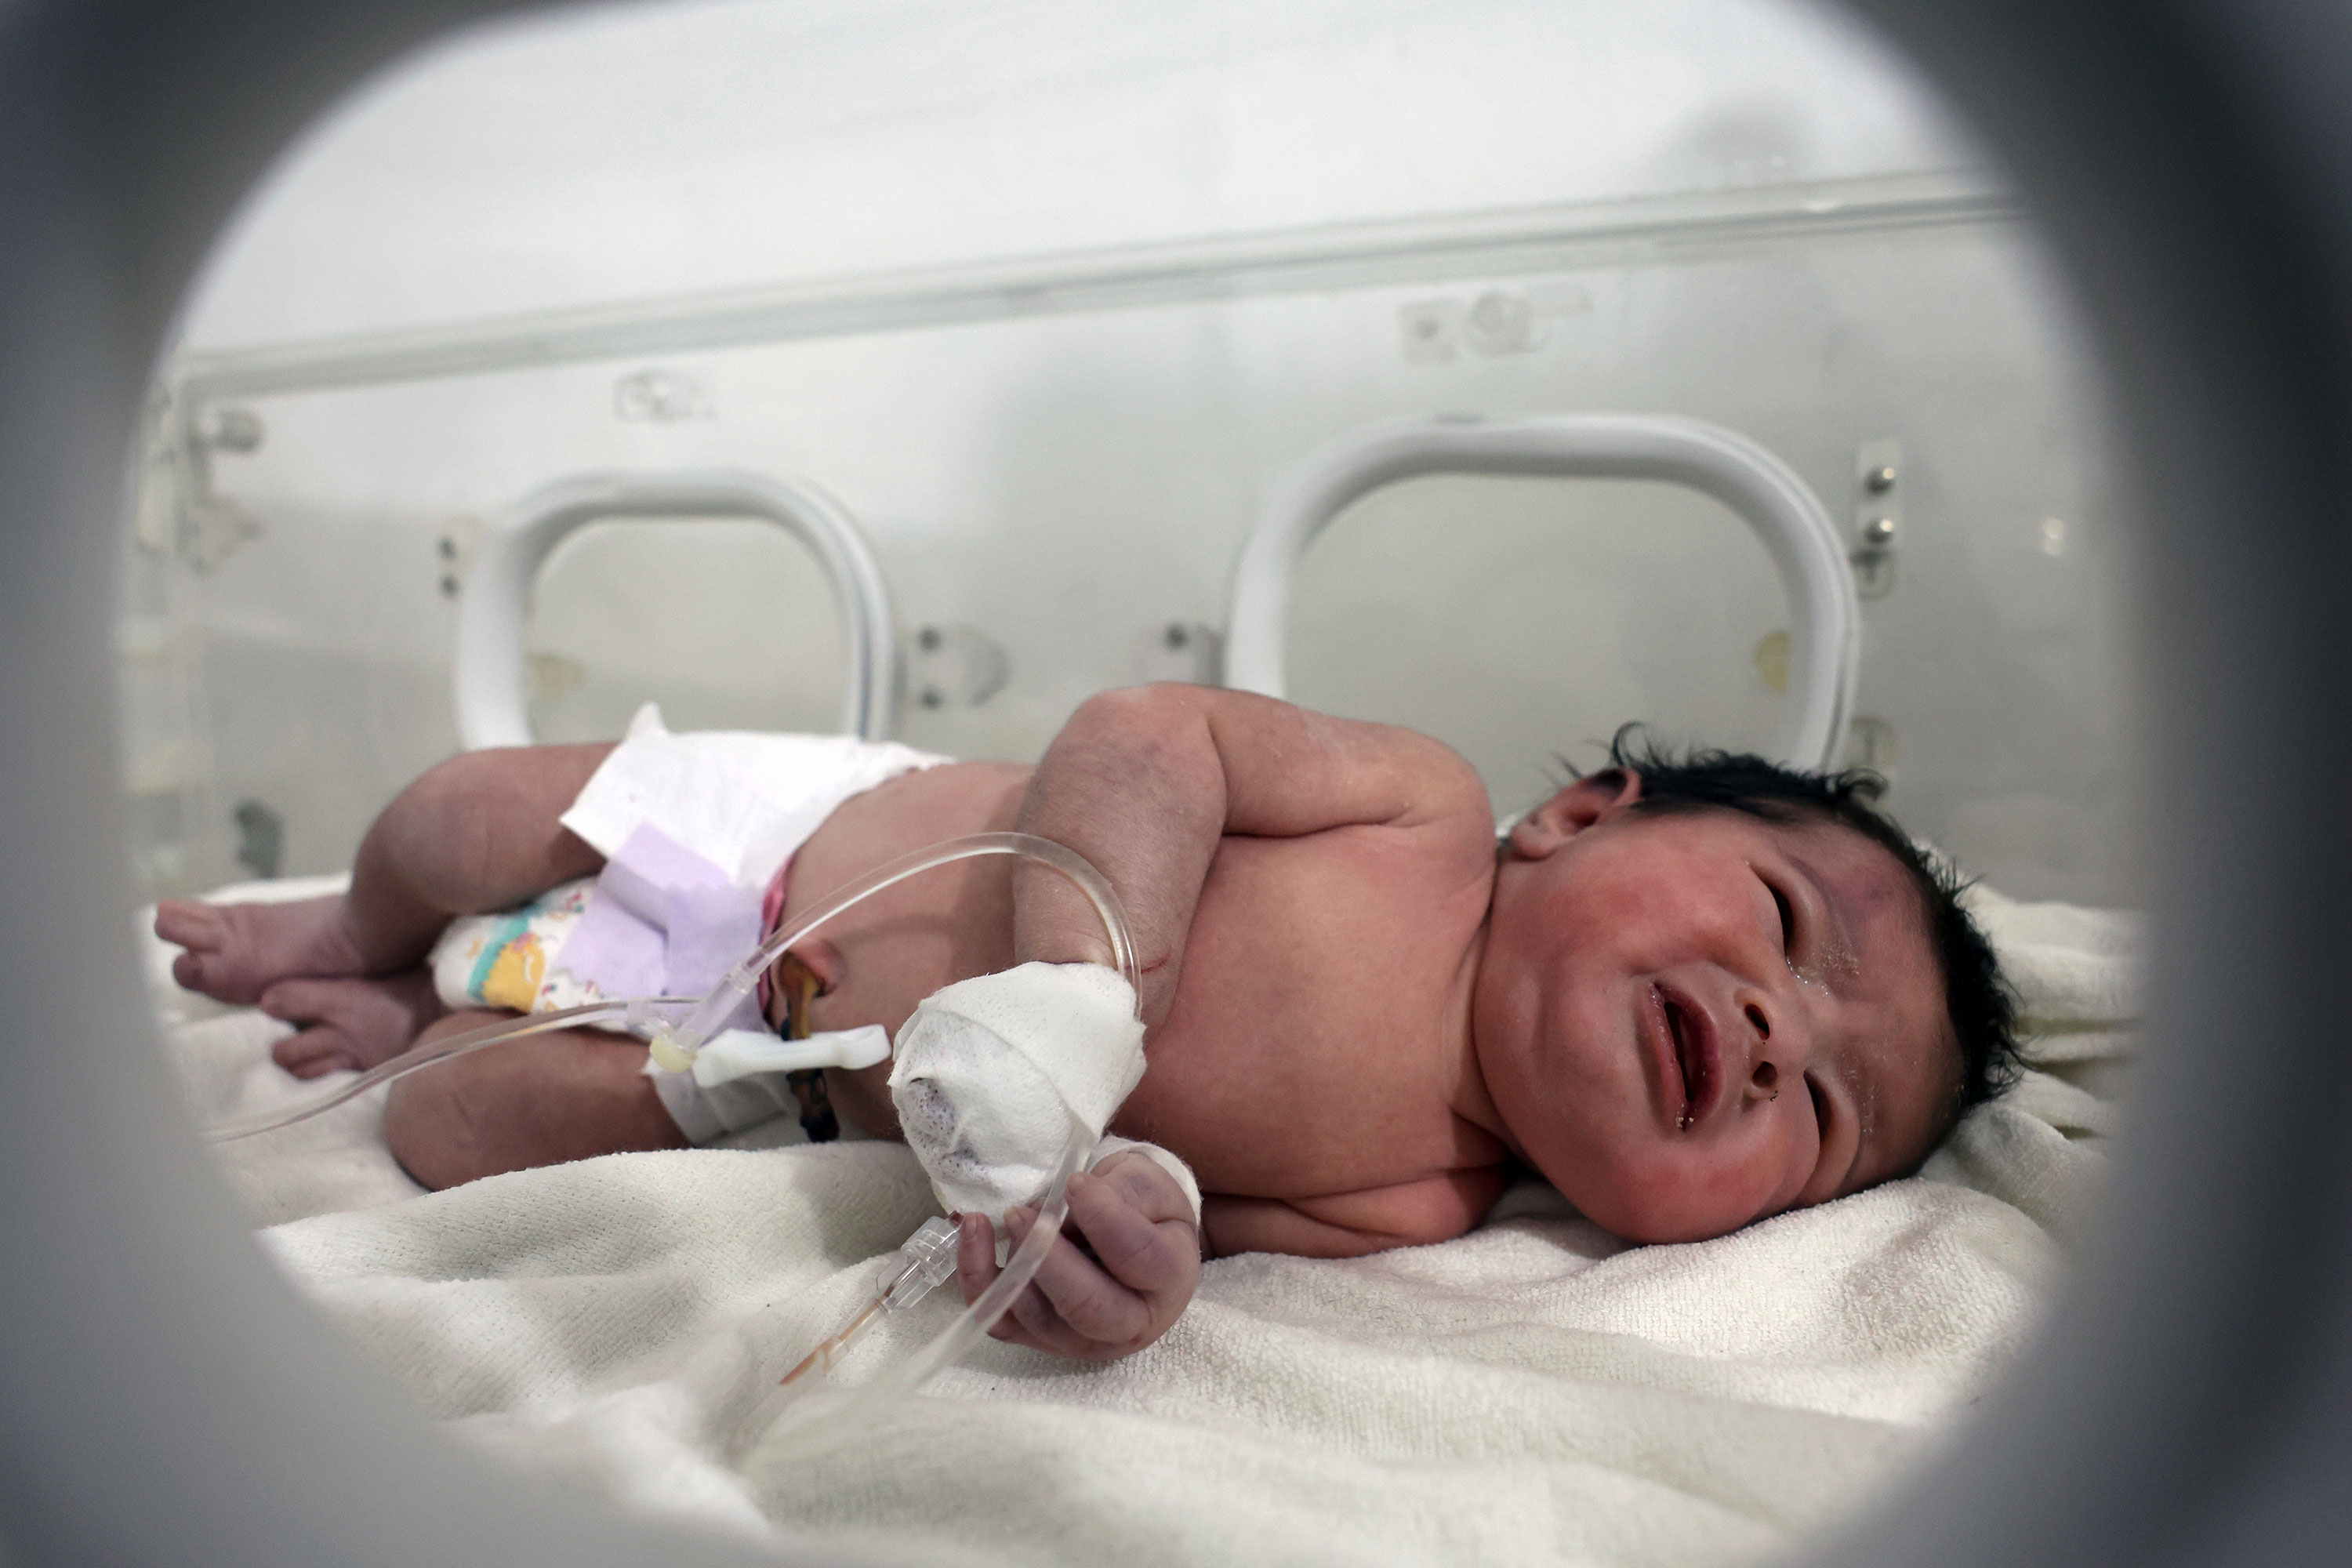 A baby girl who was rescued receives treatment inside an incubator at a hospital in Afrin, Syria, on Tuesday.